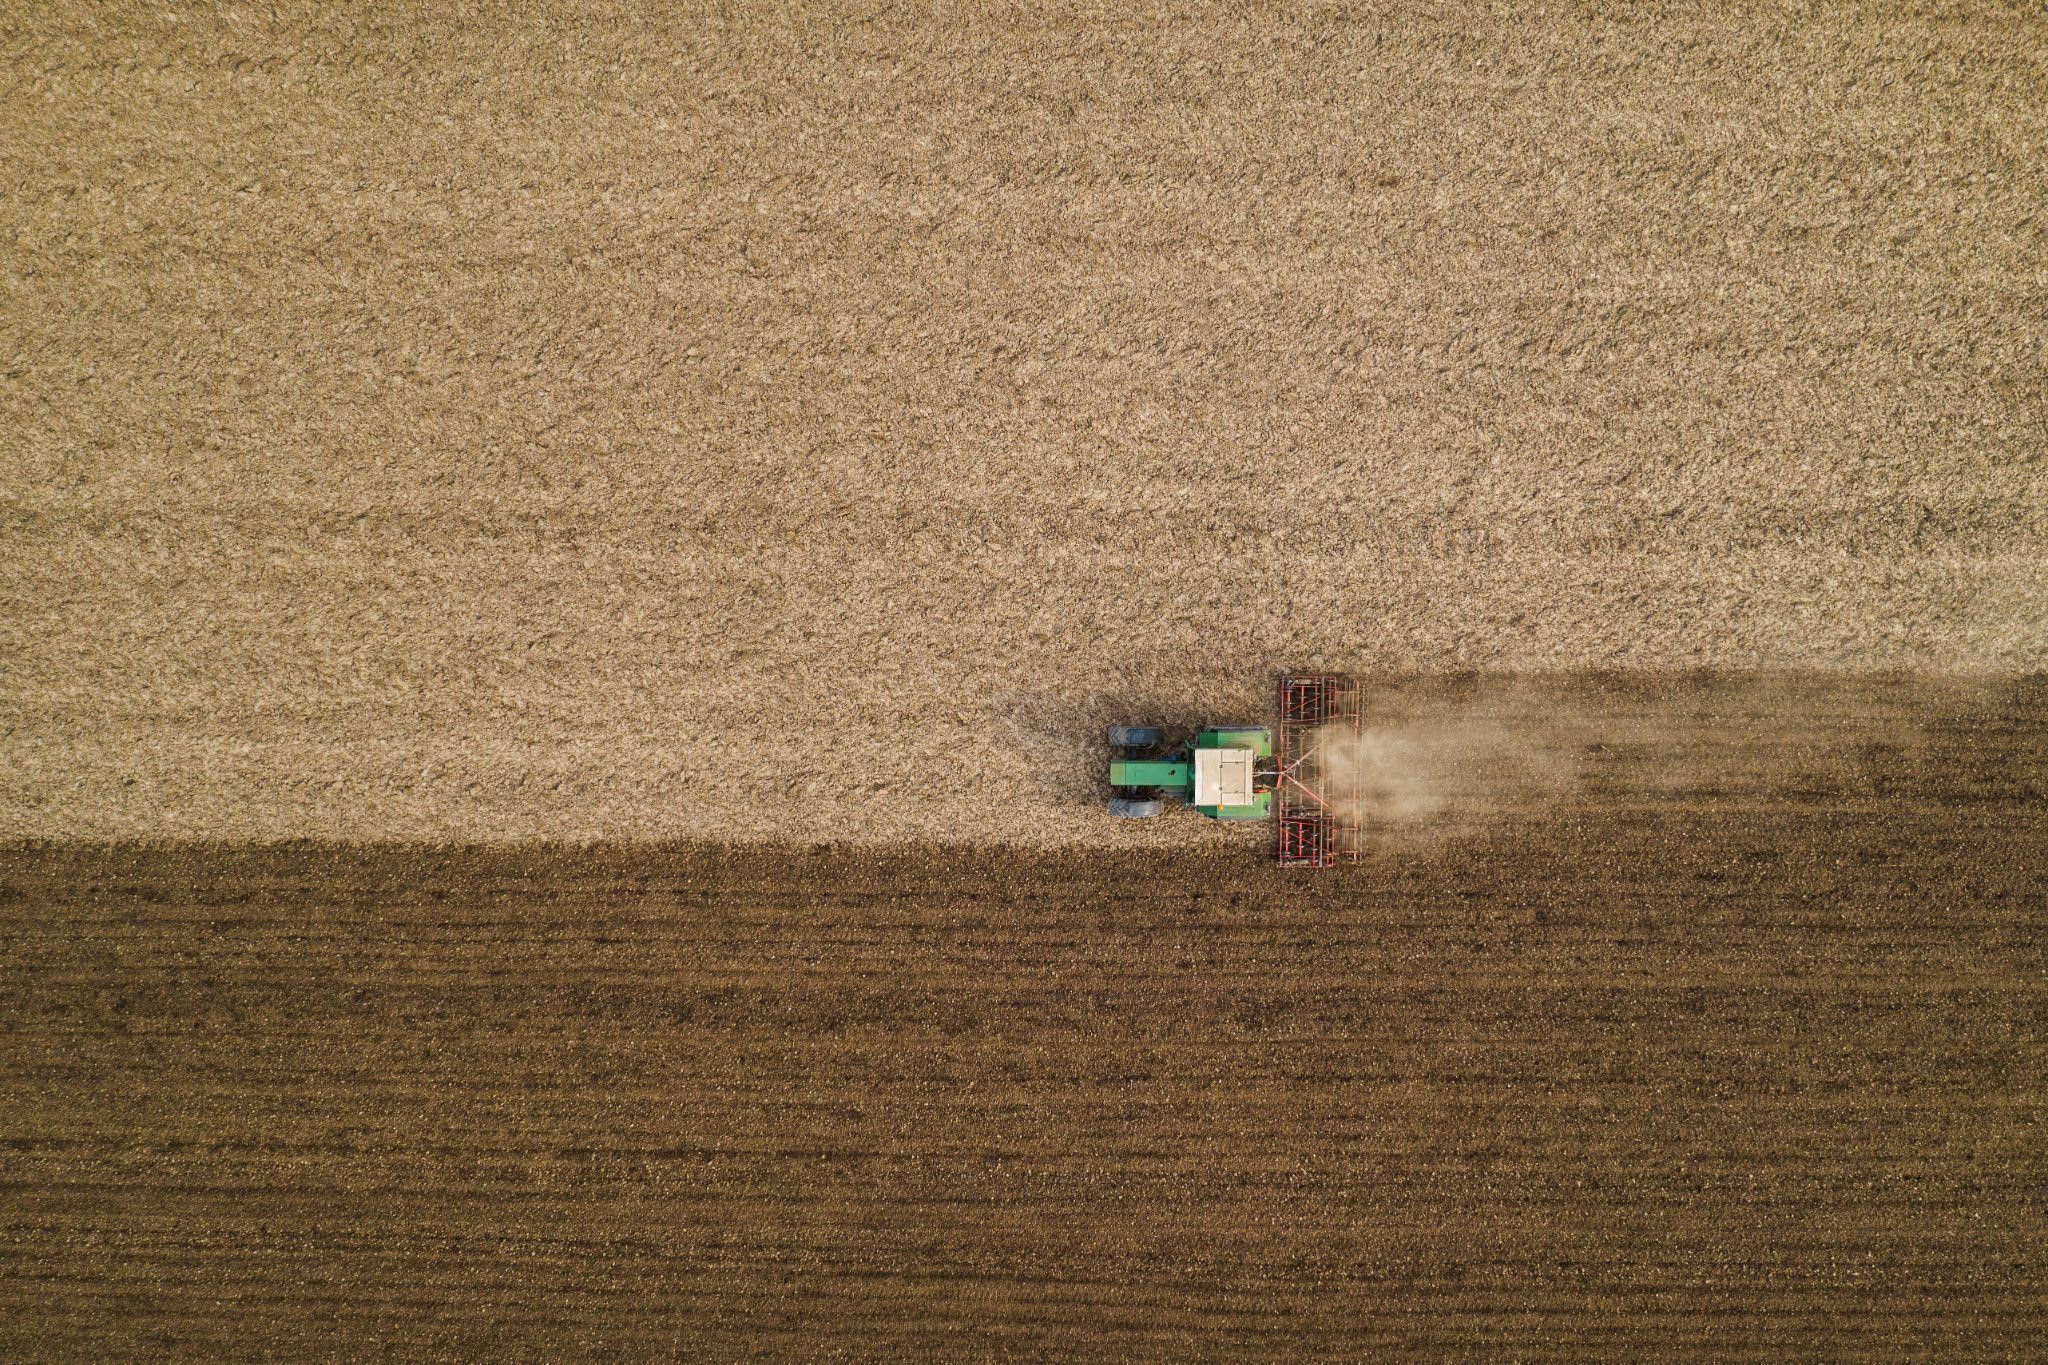 Featured image for “Vertical Tillage and Soil Conservation”